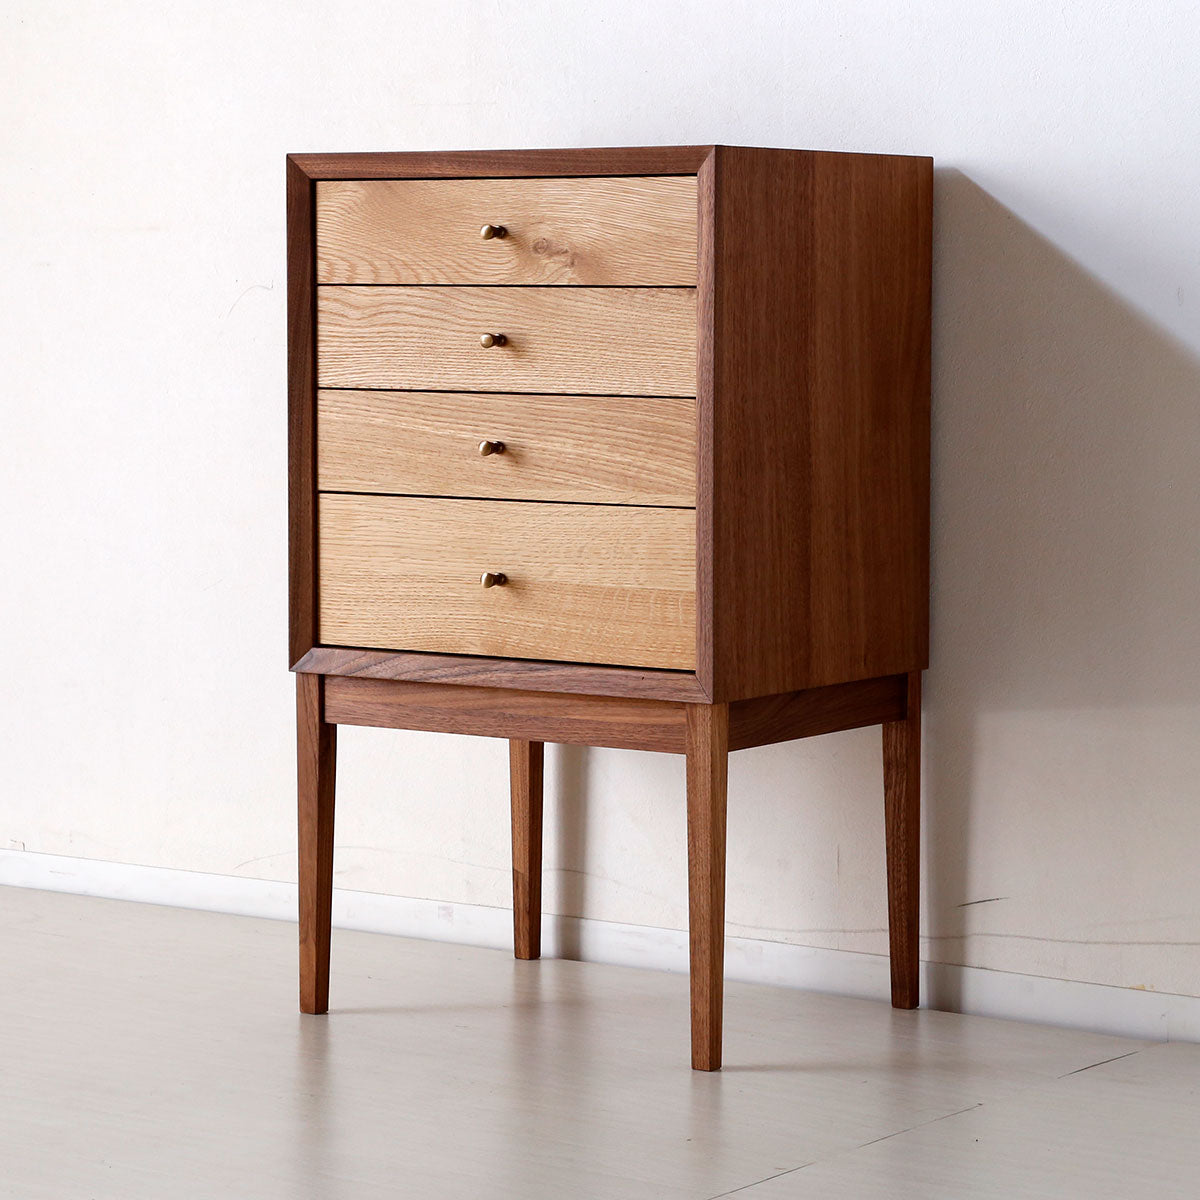 Stylish chest of drawers made of popular woods joined using traditional Japanese techniques.